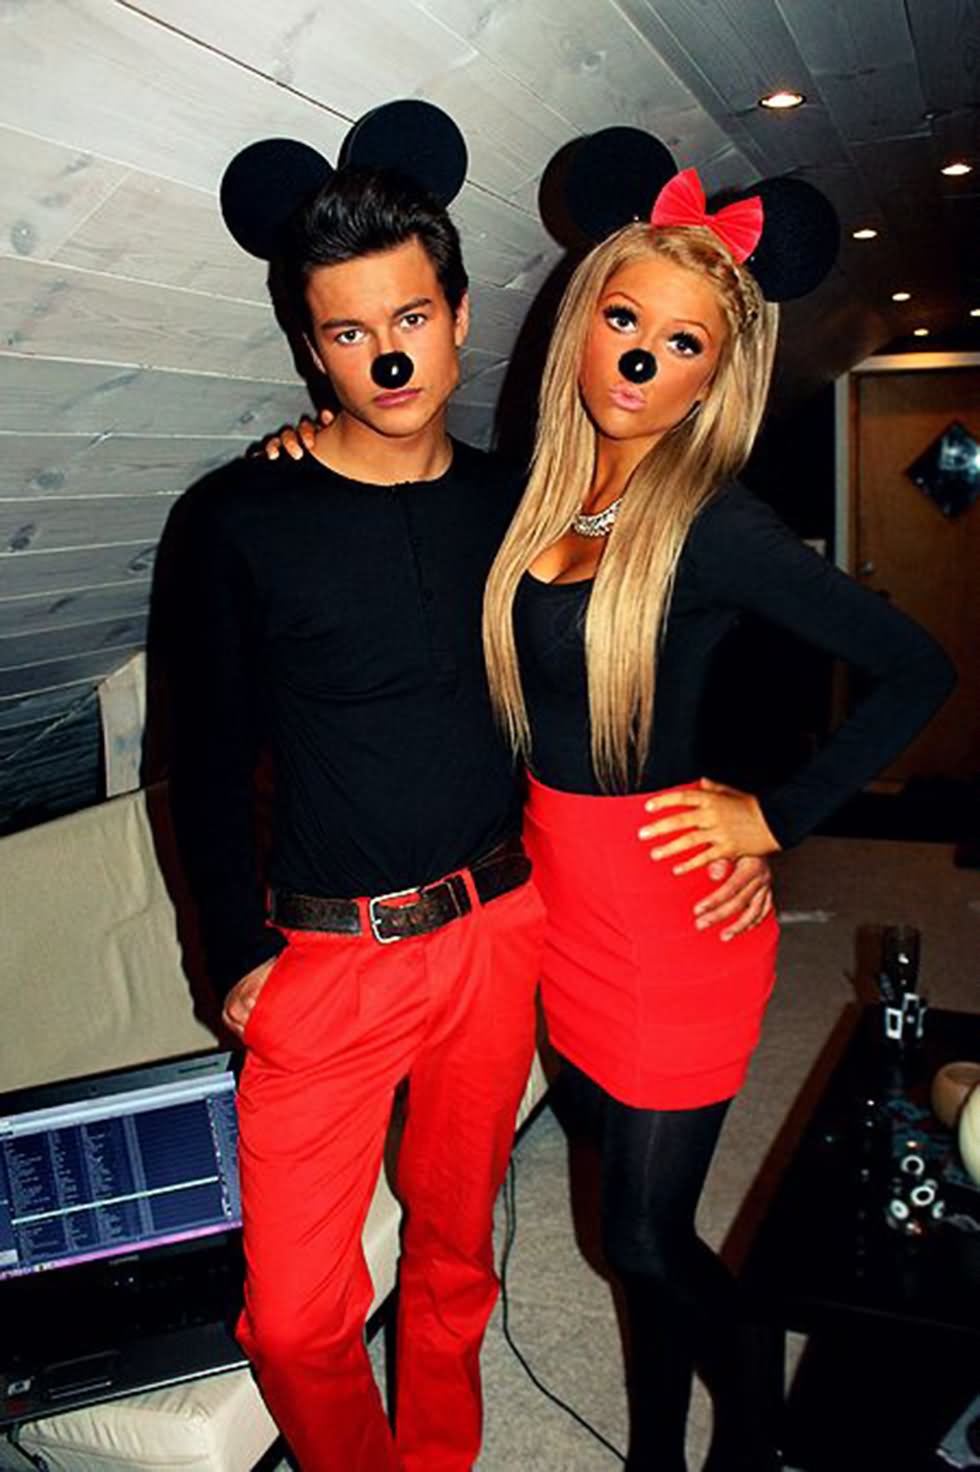 Funny Micky Mouse Costume Couple Image